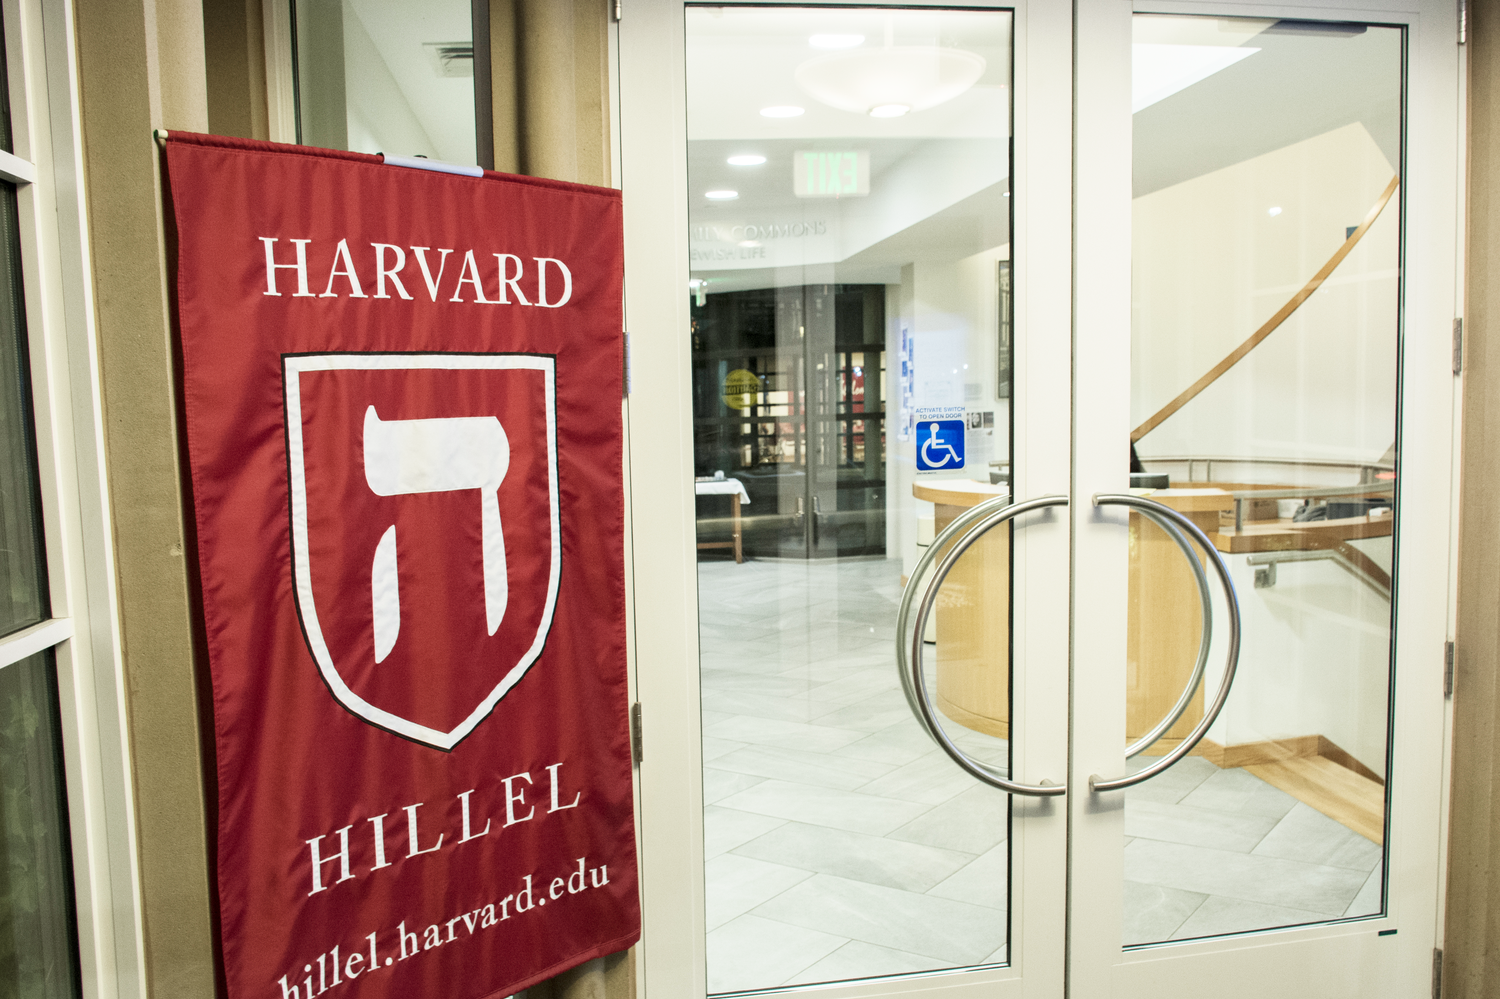 Harvard-Hillel-and-Chabad-to-Increase-Security-Following-Anti-Semitic-Attacks.png